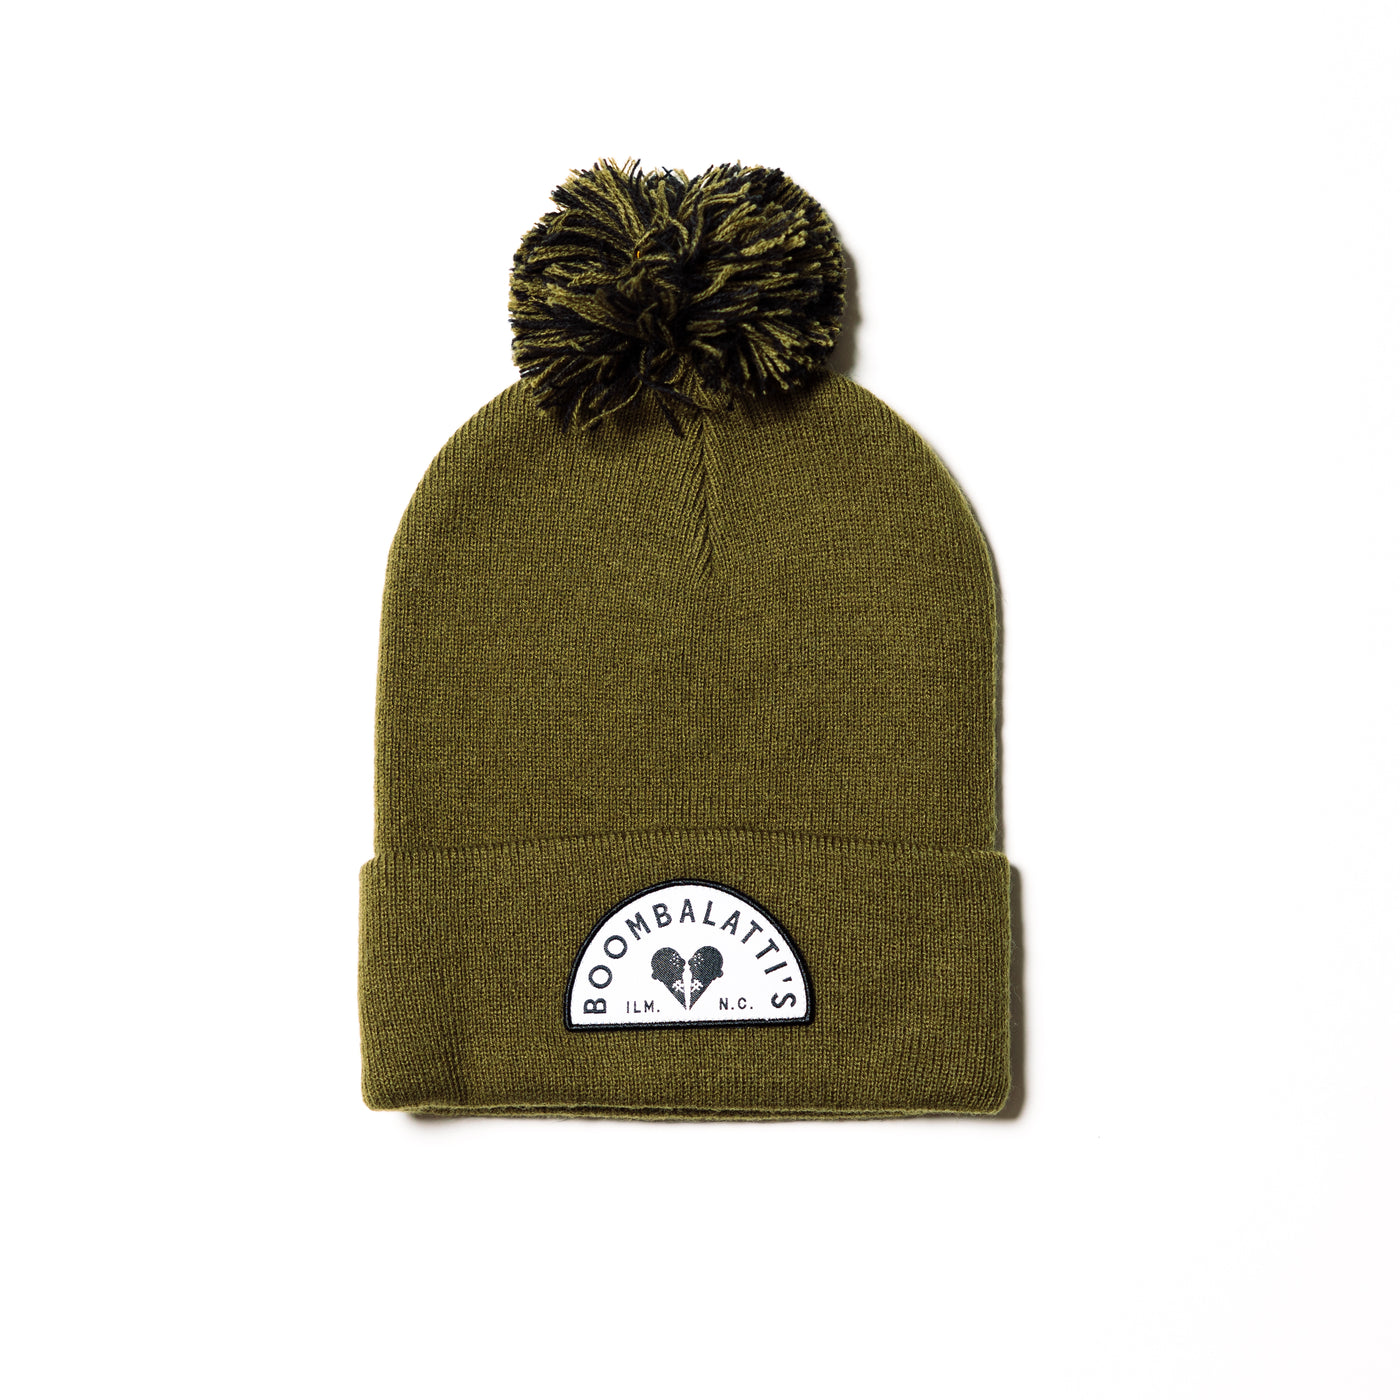 Boom Beanie with Poms - Adult Sized